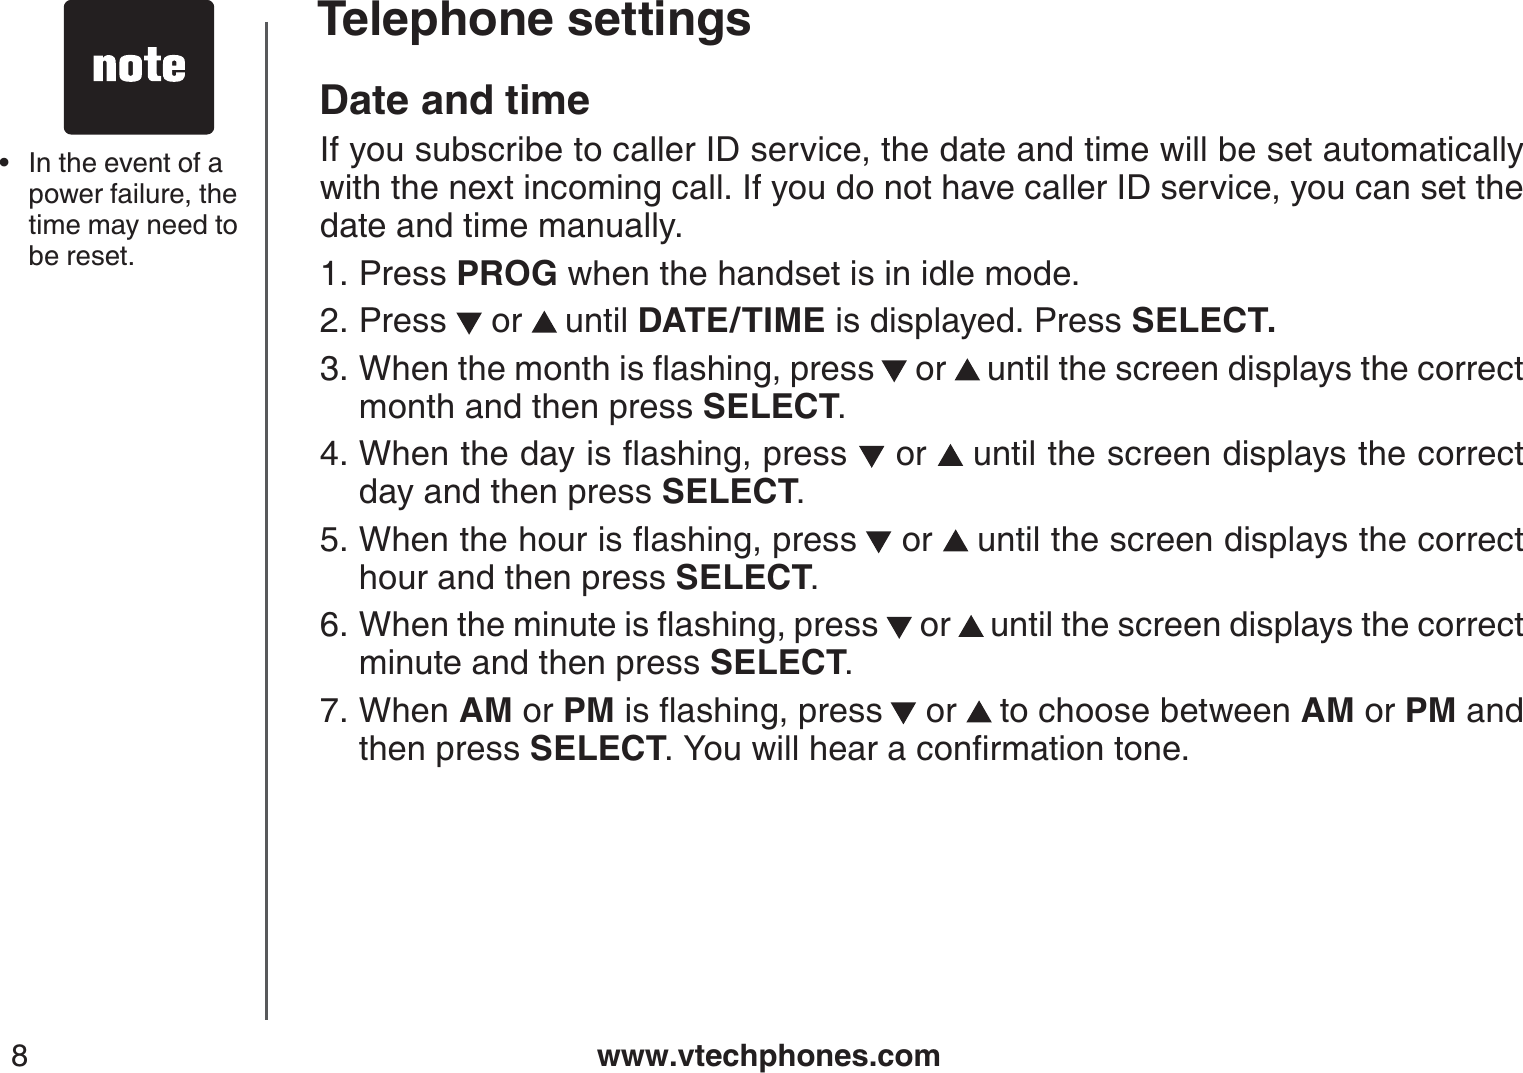 www.vtechphones.com8Telephone settingsDate and timeIf you subscribe to caller ID service, the date and time will be set automatically with the next incoming call. If you do not have caller ID service, you can set the date and time manually.Press PROG when the handset is in idle mode.Press   or  until DATE/TIME is displayed. Press SELECT.9JGPVJGOQPVJKUƀCUJKPIRTGUU  or  until the screen displays the correct month and then press SELECT.9JGPVJGFC[KUƀCUJKPIRTGUU  or  until the screen displays the correct day and then press SELECT.9JGPVJGJQWTKUƀCUJKPIRTGUU  or  until the screen displays the correct hour and then press SELECT.9JGPVJGOKPWVGKUƀCUJKPIRTGUU  or  until the screen displays the correct minute and then press SELECT.When AM or PM KUƀCUJKPIRTGUU  or  to choose between AM or PM and then press SELECT;QWYKNNJGCTCEQPſTOCVKQPVQPG1.2.3.4.5.6.7.In the event of a power failure, the time may need to be reset.•